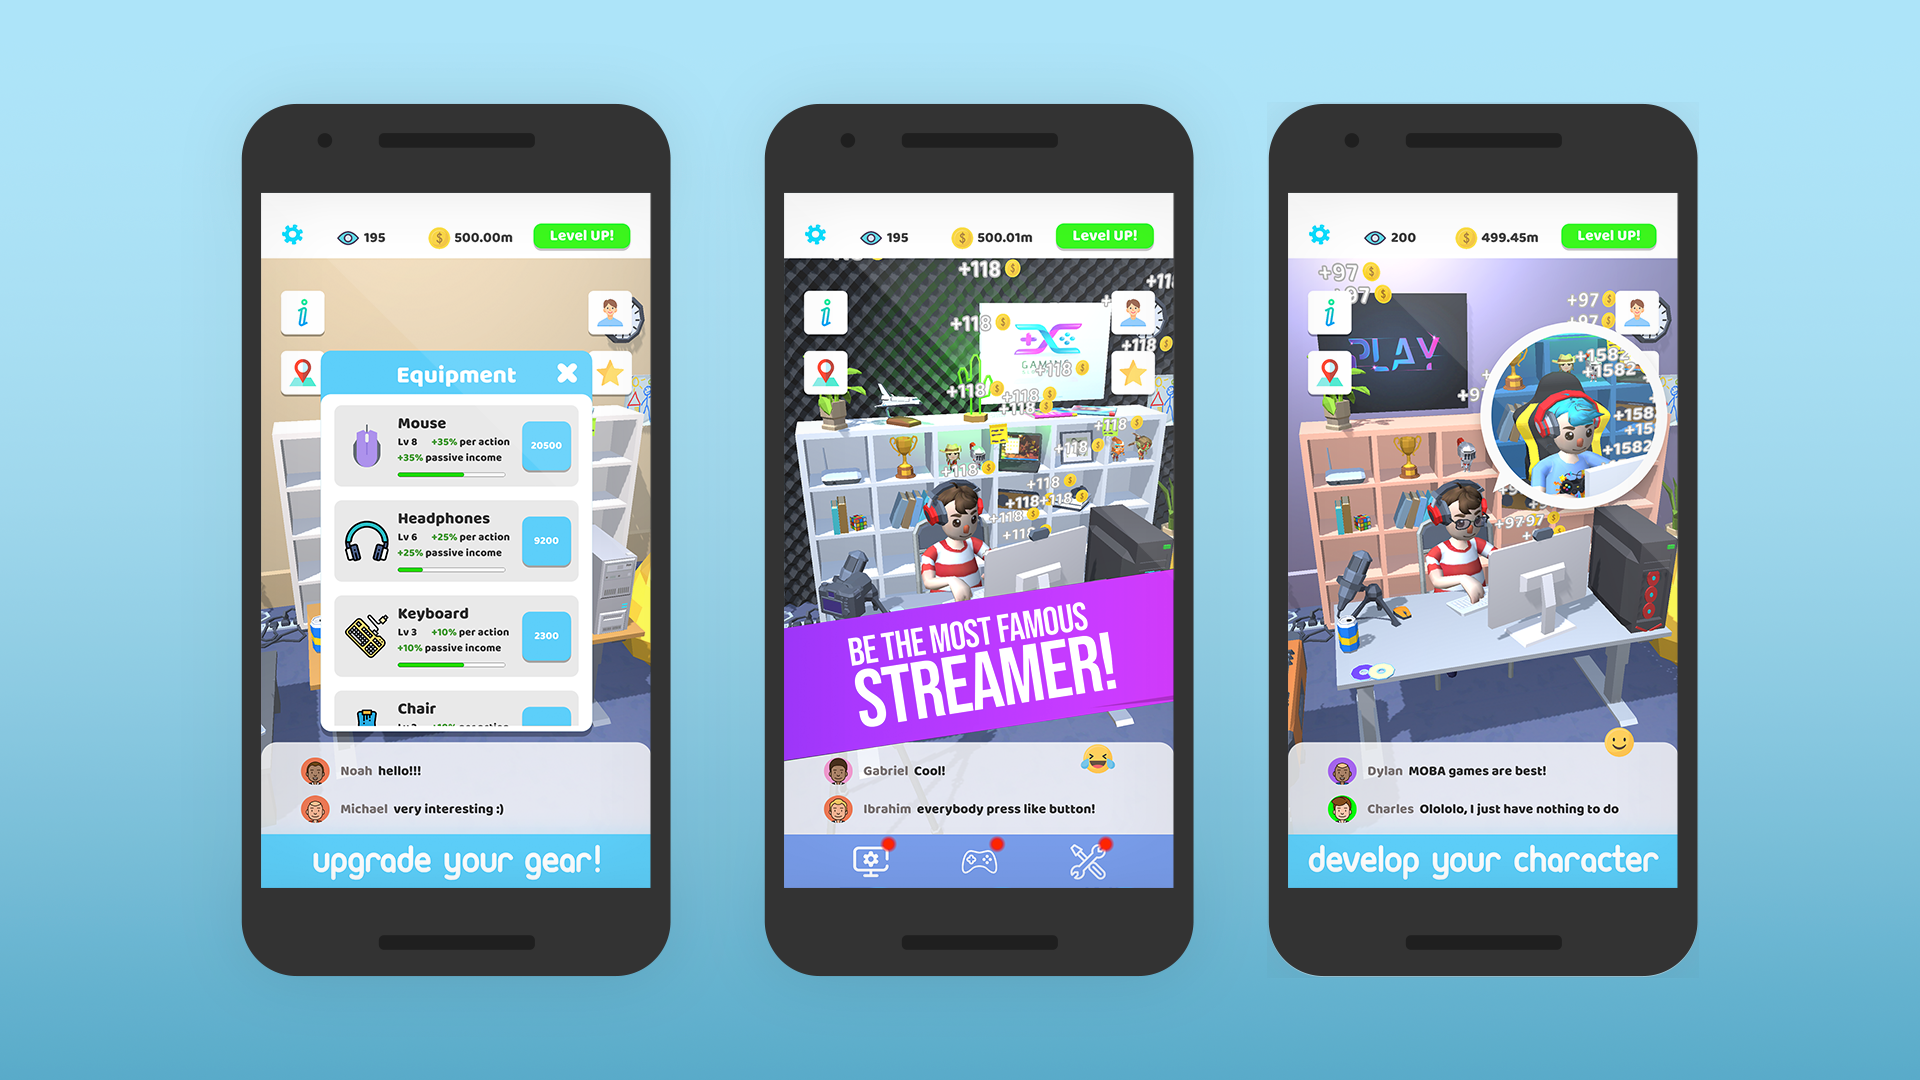 App Streamer Life Simulator 3D Android game 2021 